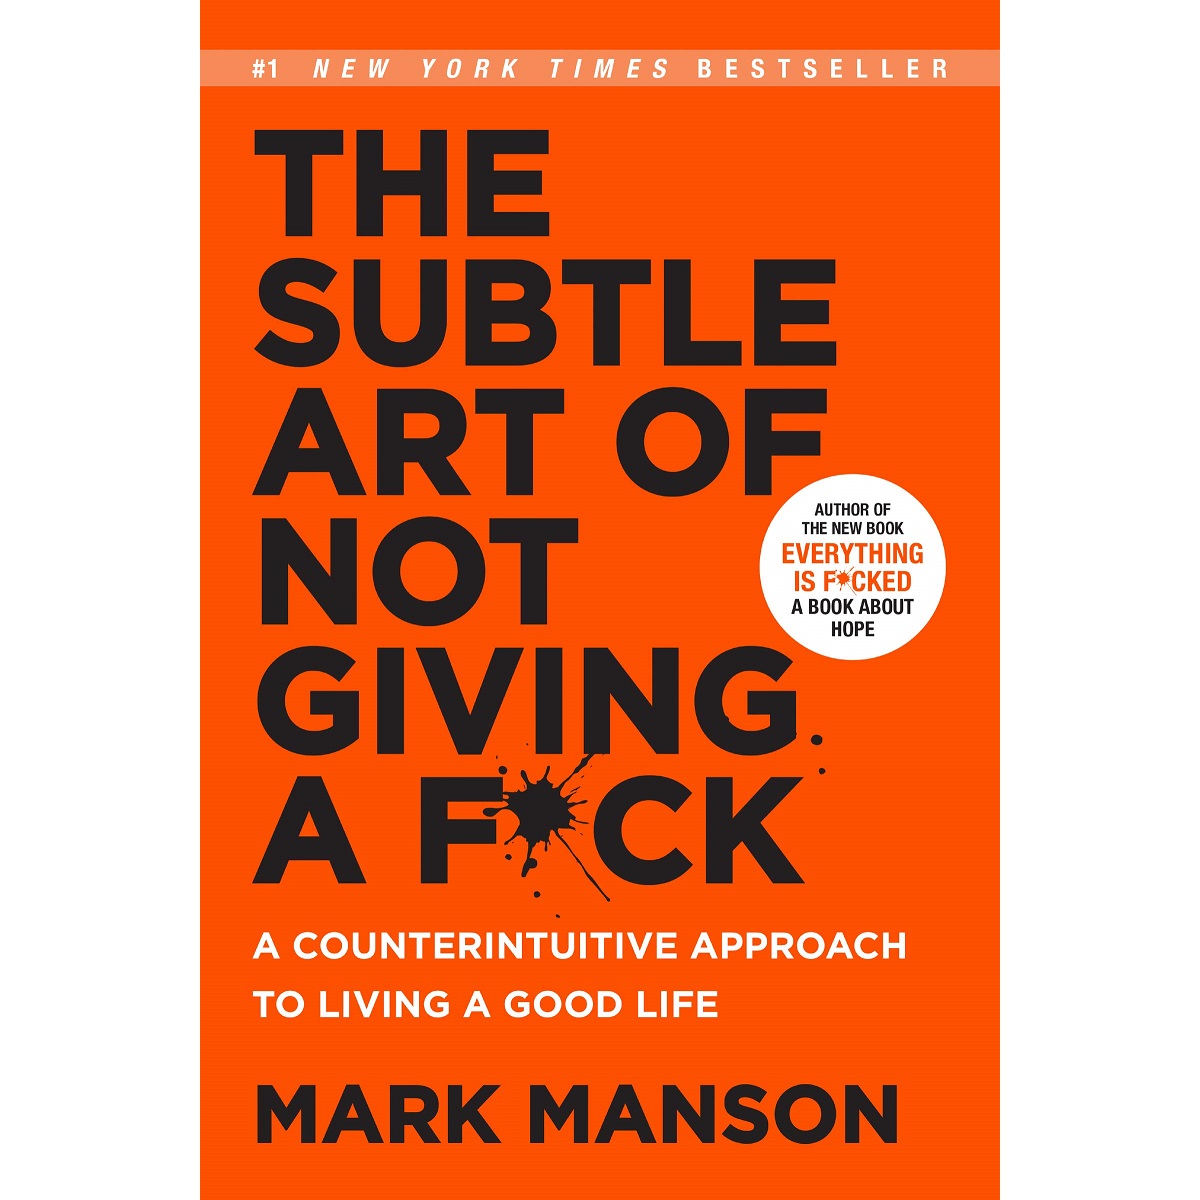 The Subtle Art of Not Giving a F*ck By Mark Manson